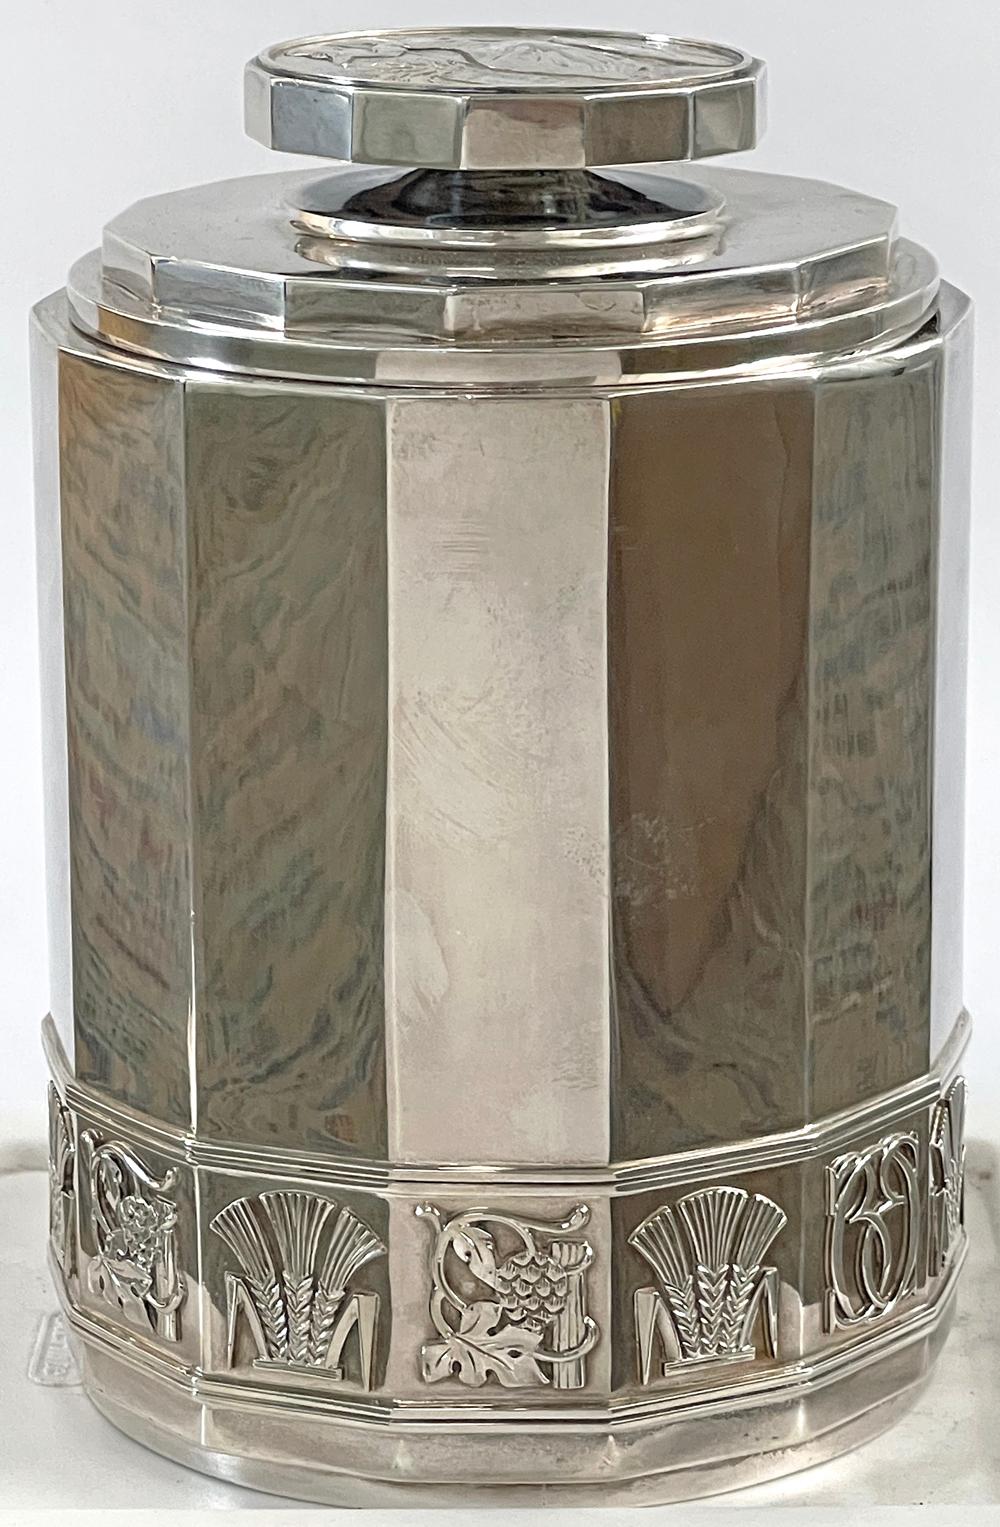 One of the most extraordinary and beautifully crafted Art Deco silver pieces we have ever seen, this 1930s-vintage sterling canister or humidor was made by Erik Fleming's Atelier Borgila in Sweden, commissioned by the Swedish Brewery Association.